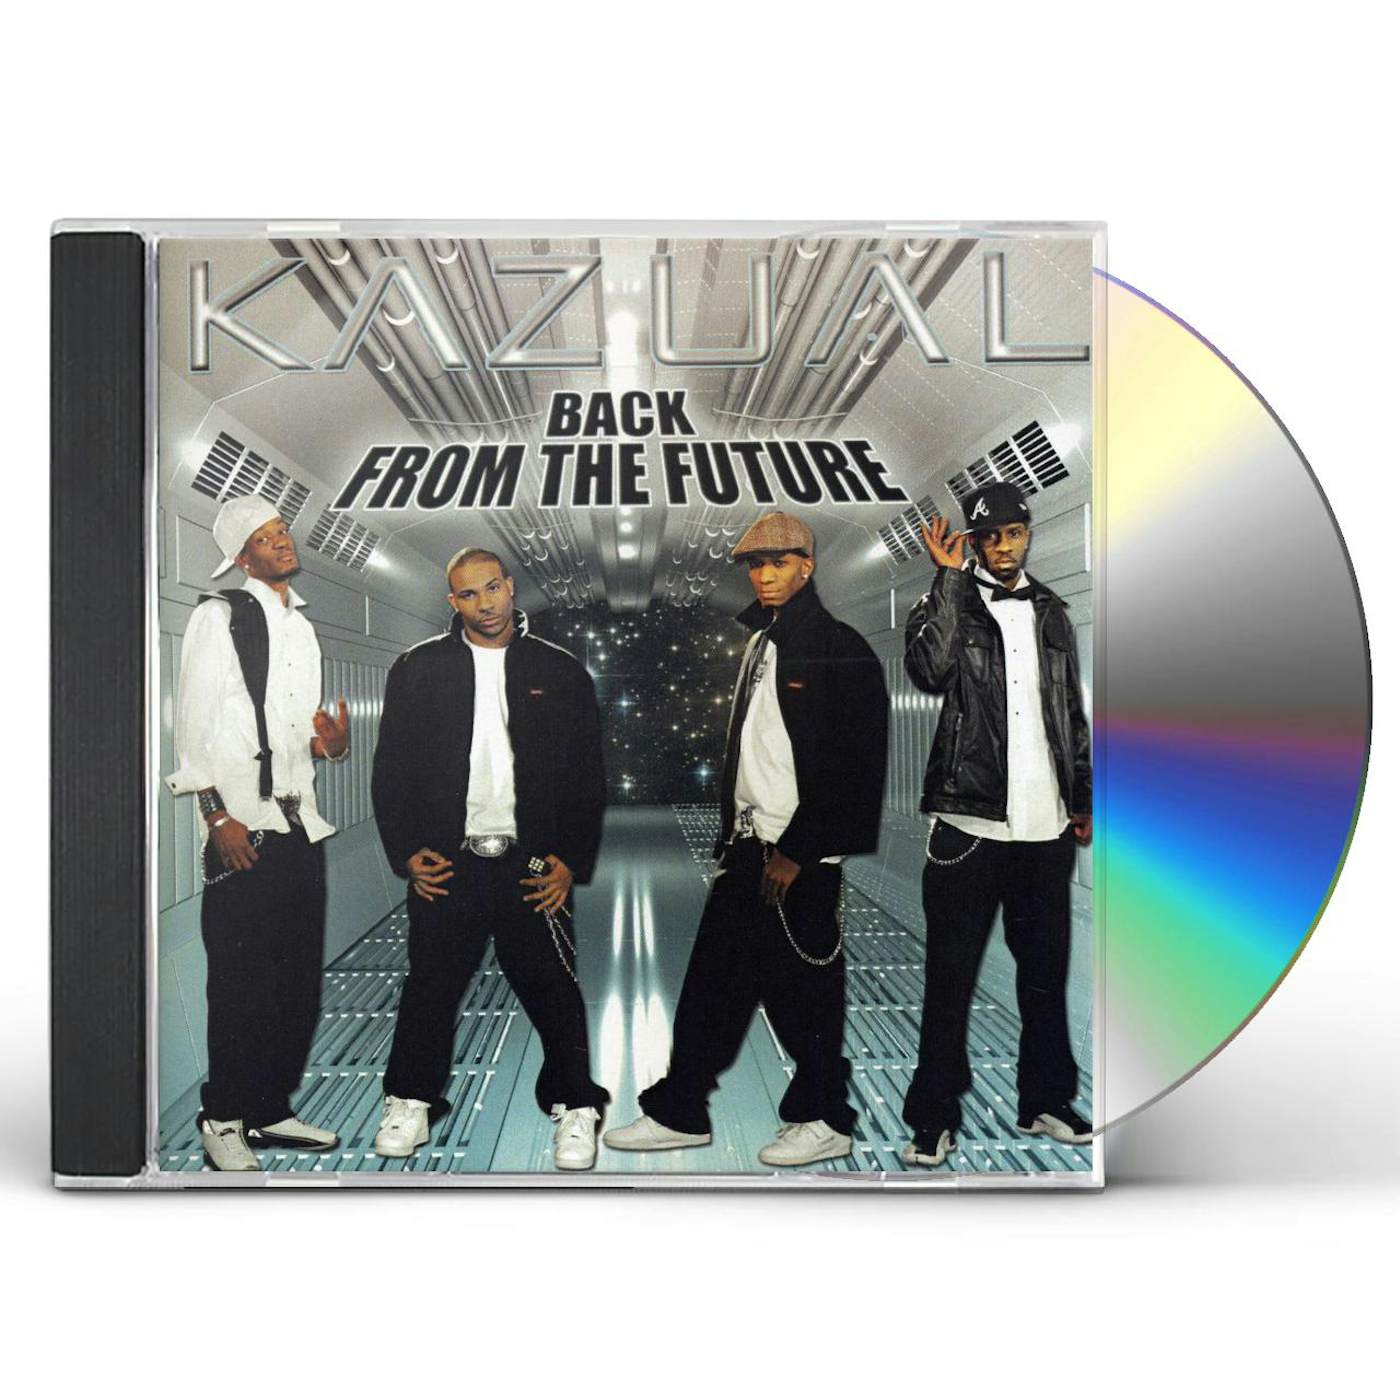 Kazual BACK FROM THE FUTURE CD